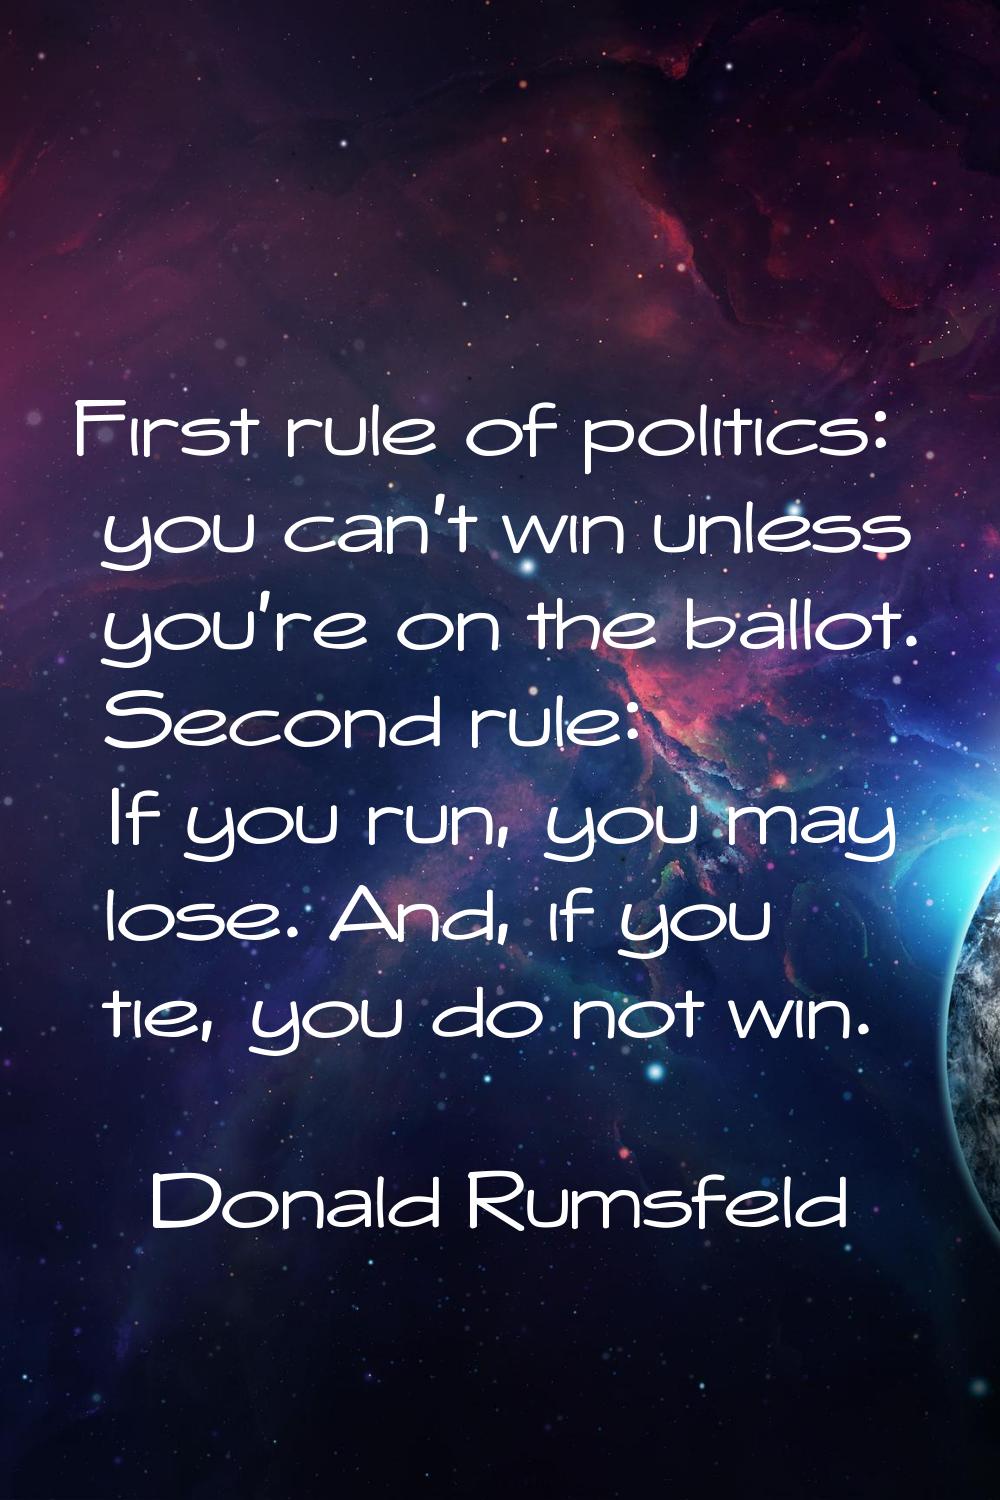 First rule of politics: you can't win unless you're on the ballot. Second rule: If you run, you may